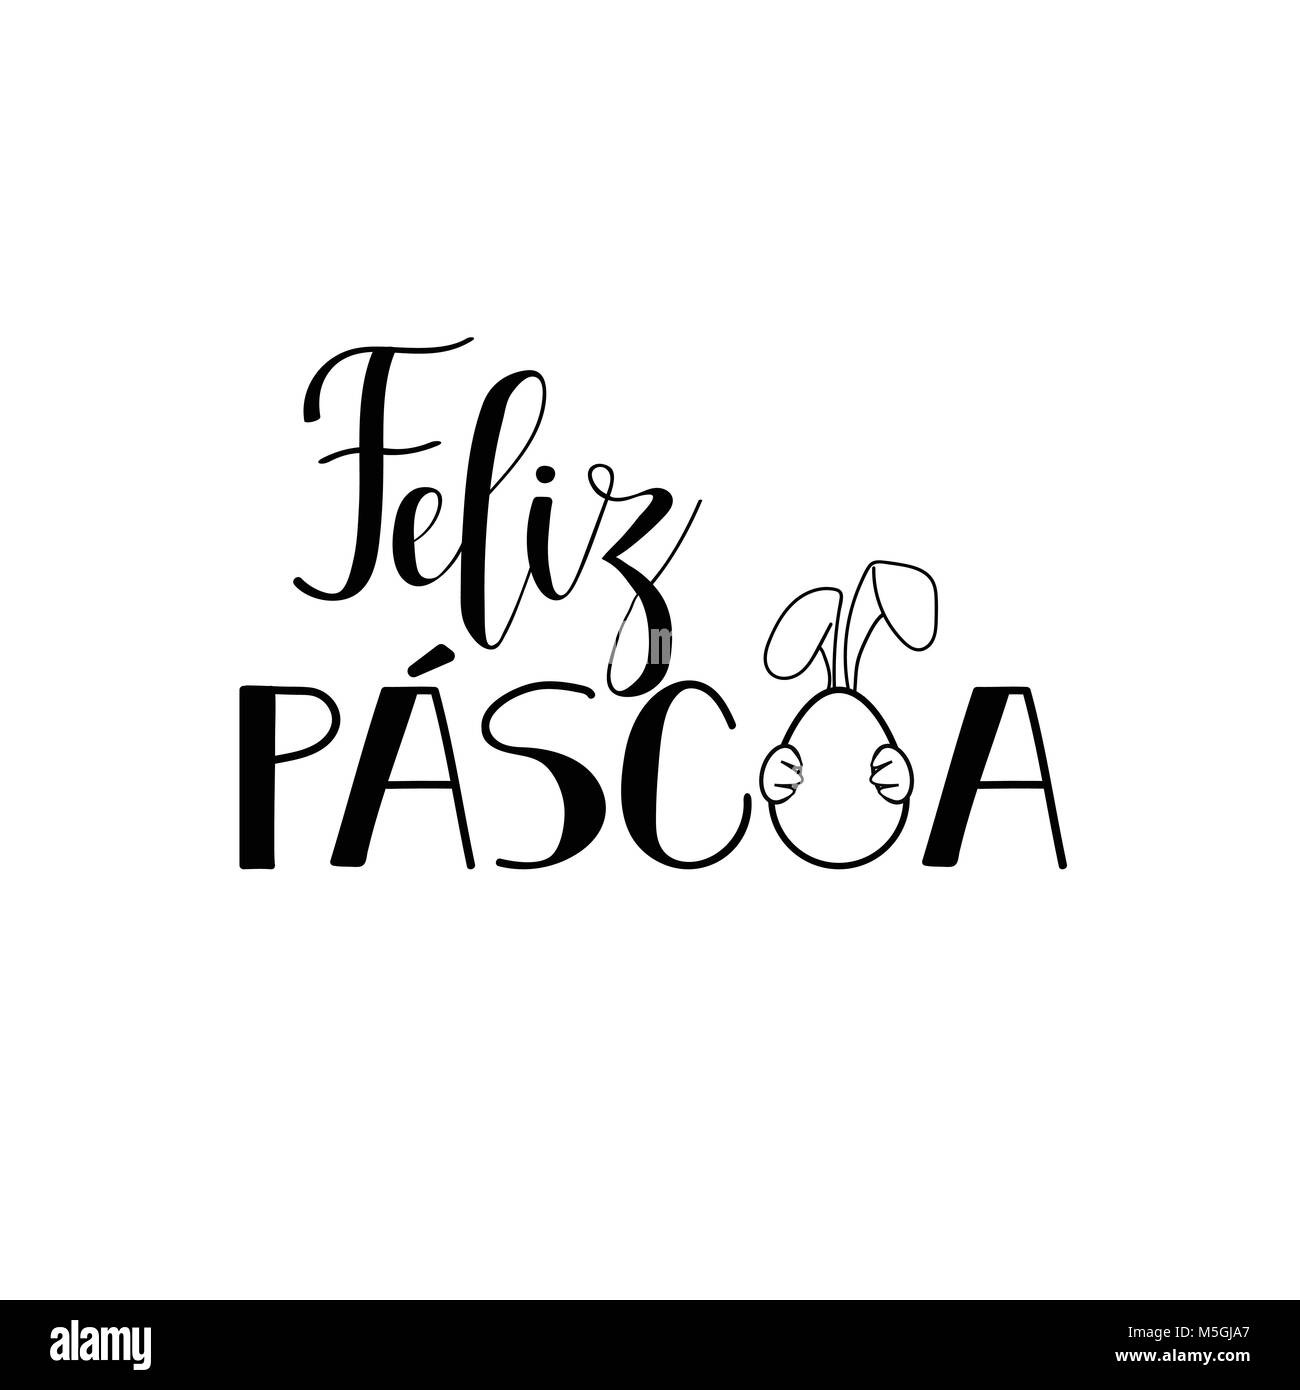 Feliz Pascoa. Lettering. Translation from Portuguese: Happy Easter. quote to design greeting card, poster, banner, printable wall art, t-shirt and oth Stock Vector